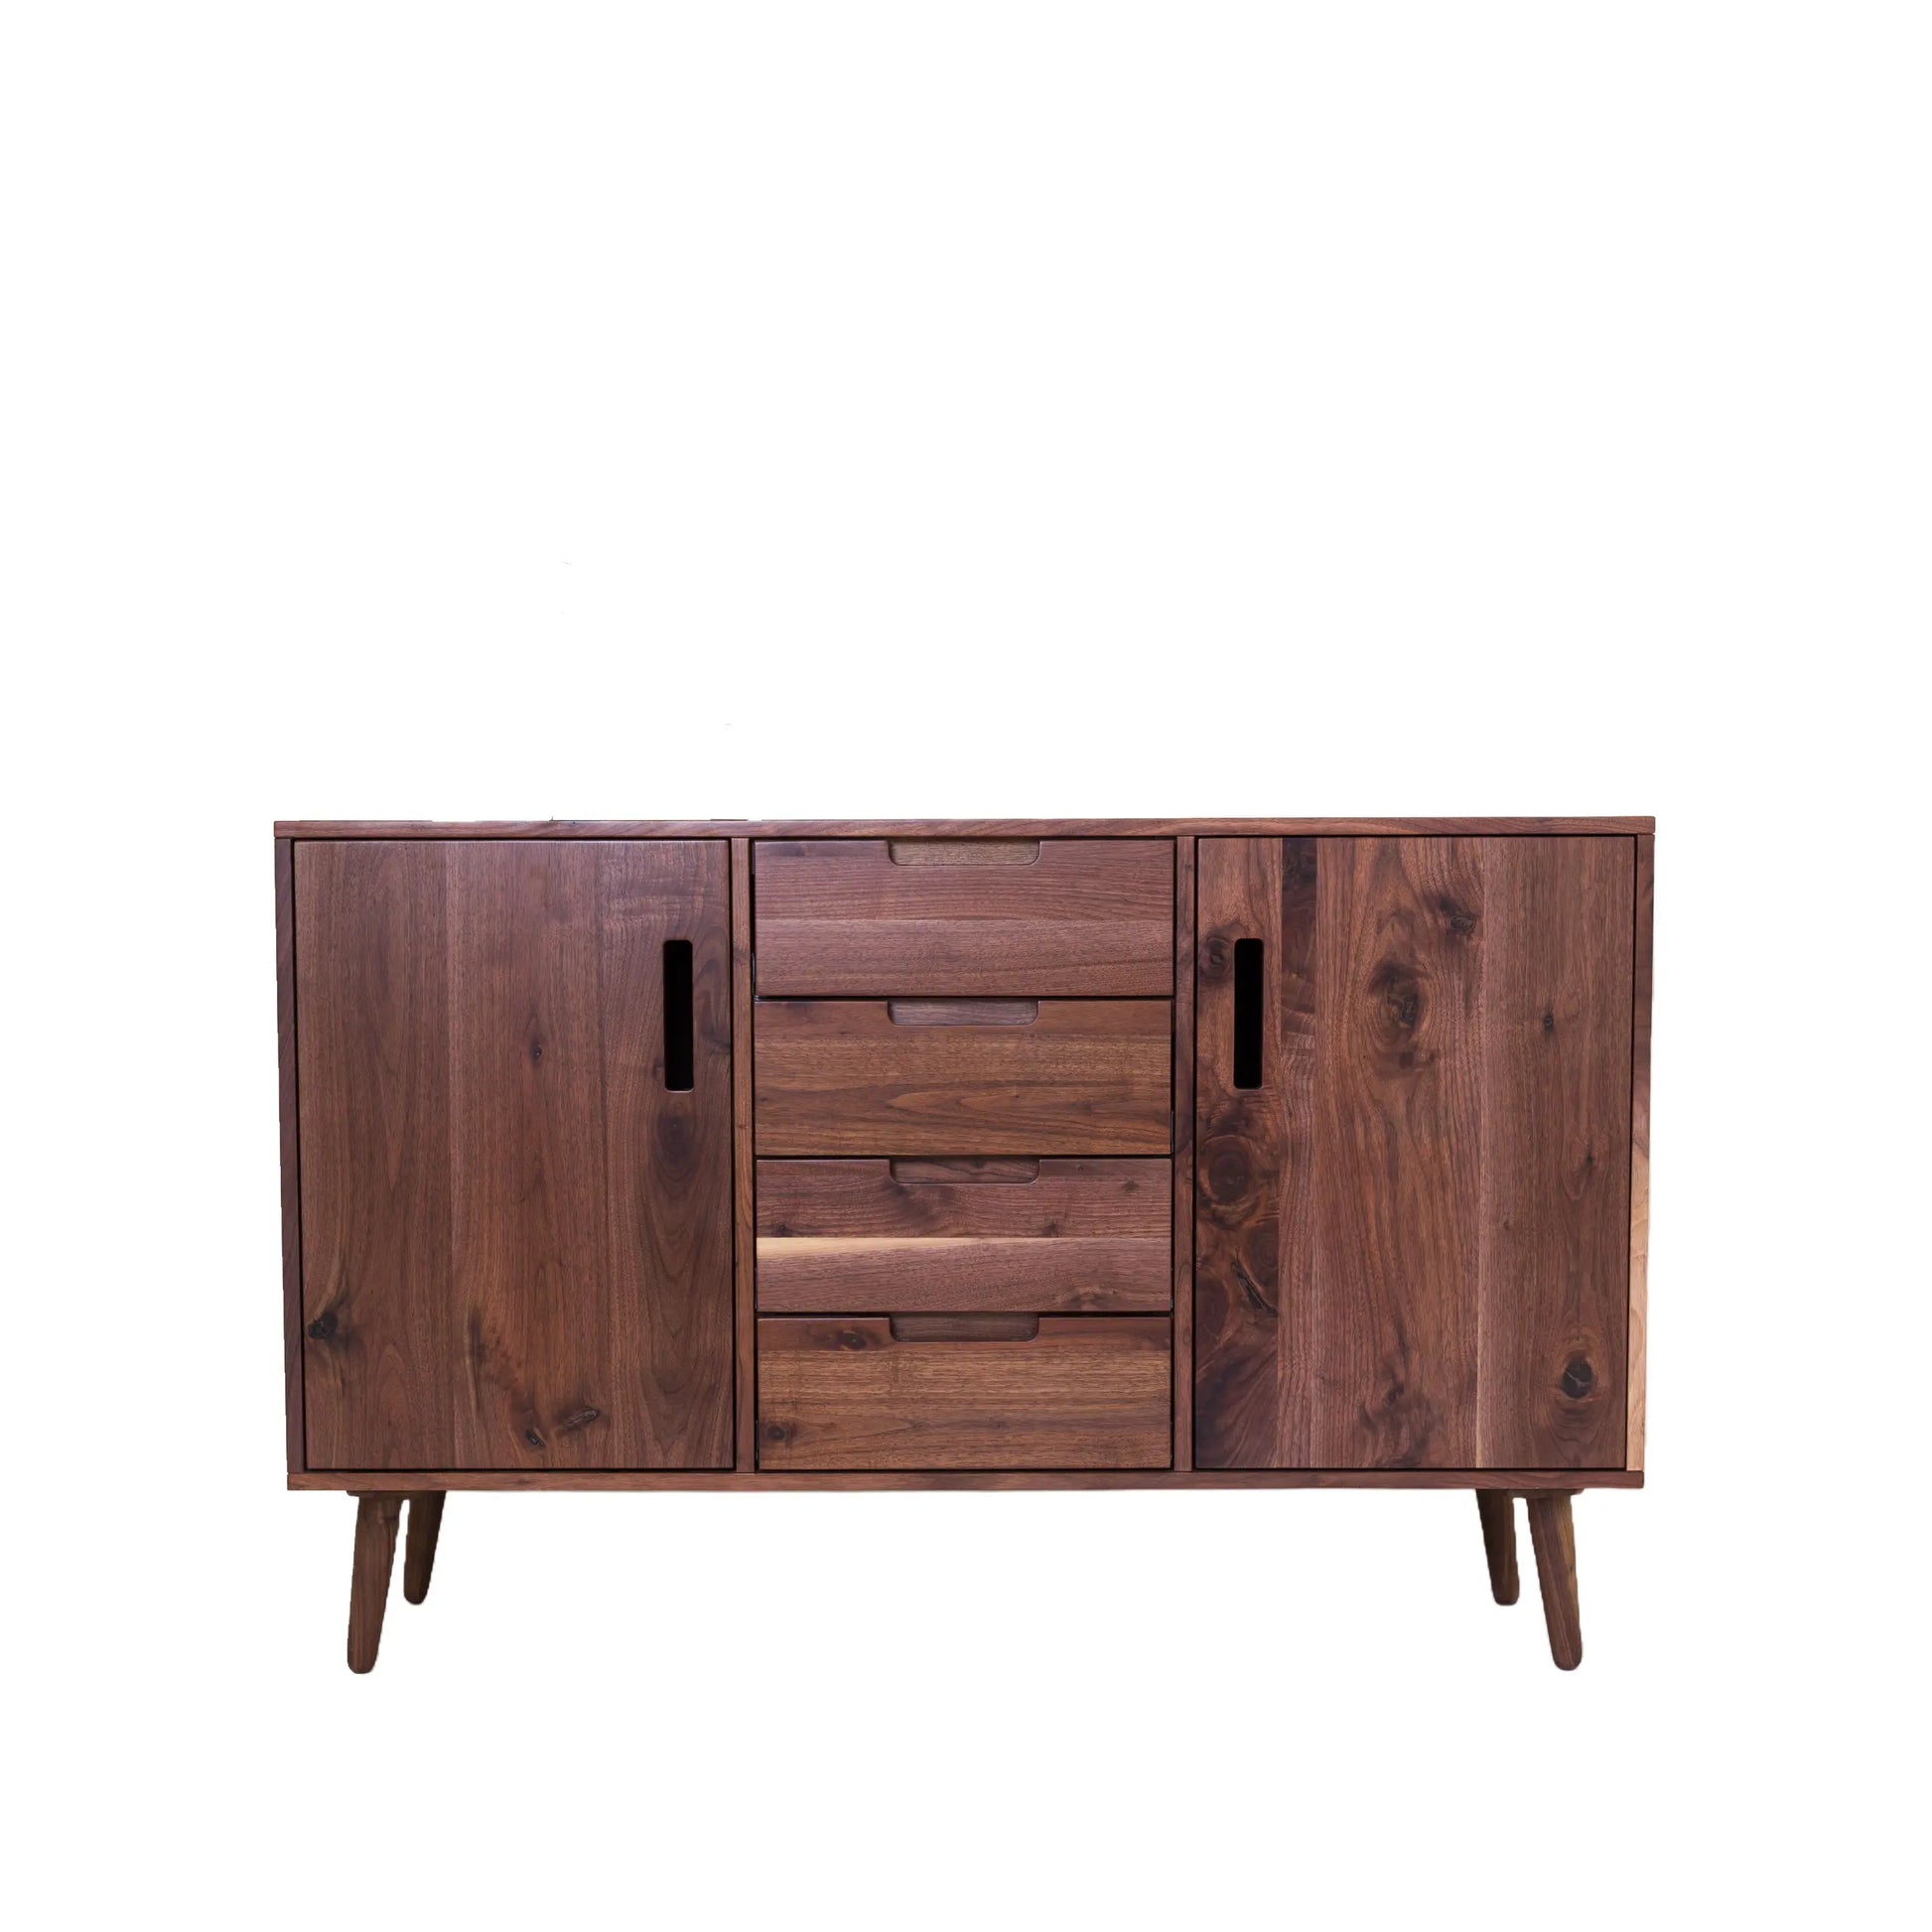 The Astrid- Mid Century Modern Buffet Moderncre8ve